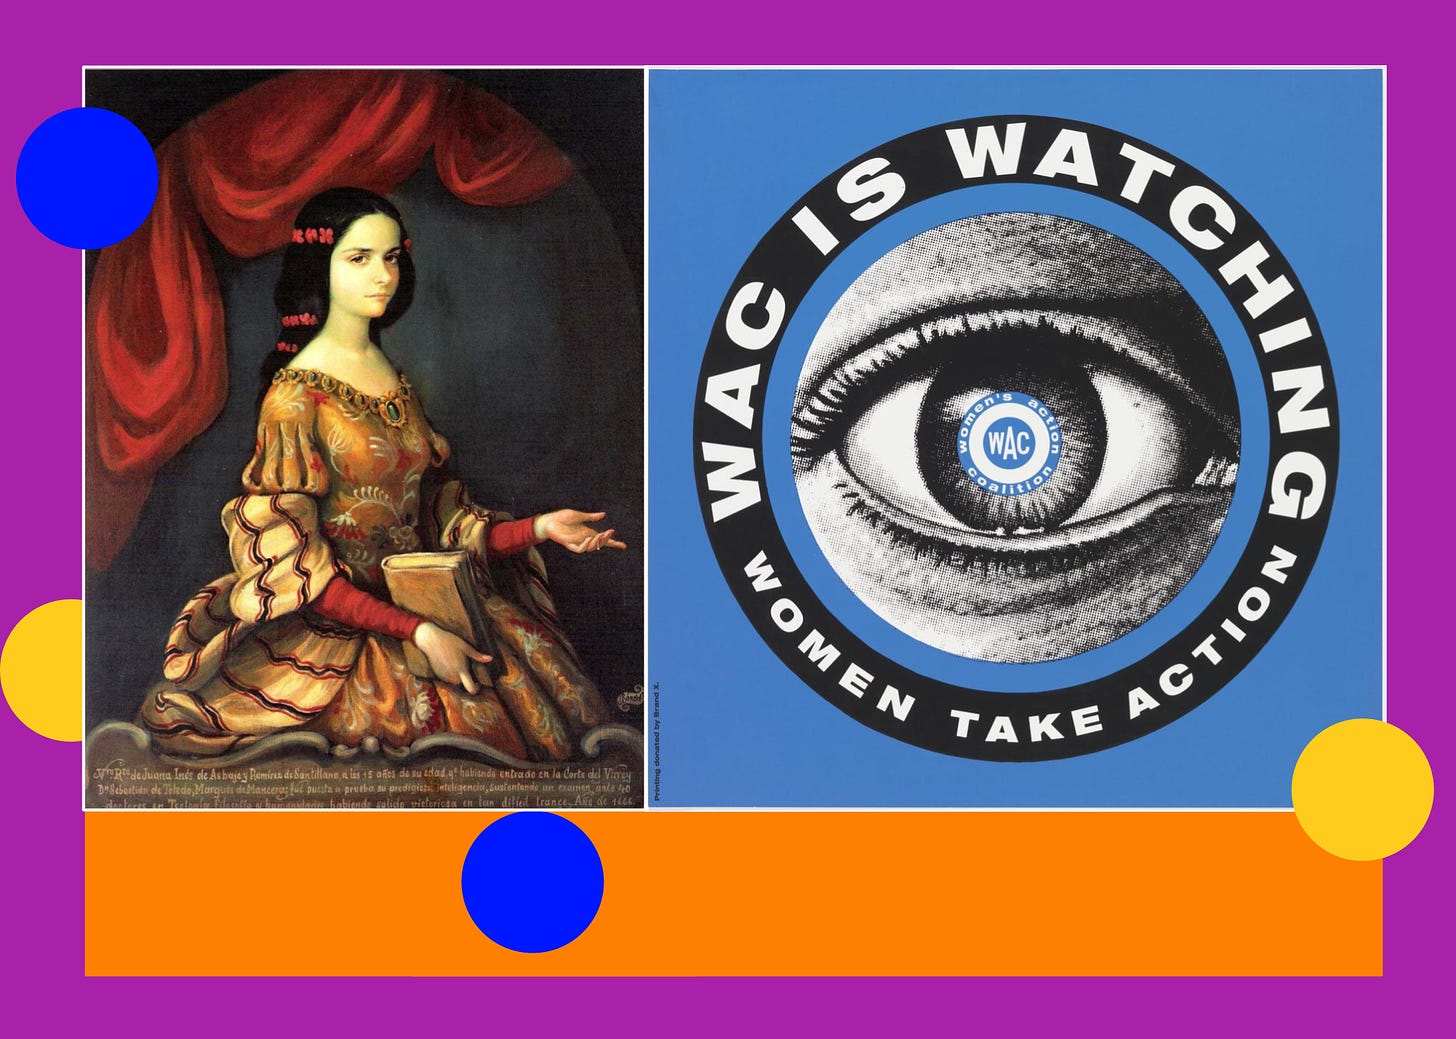 Image: A portrait of Sor Juana before she became a nun. Her long dark hair is pulled back loosely with red ribbons. She wears an elaborate red and gold dress and holds a book in her hand. Her other hand is open and gesturing forward. The logo for the Women’s Action Committee, featuring a photograph of a closeup eye with a circle of text around it that reads “WAC IS WATCHING WOMEN TAKE ACTION”